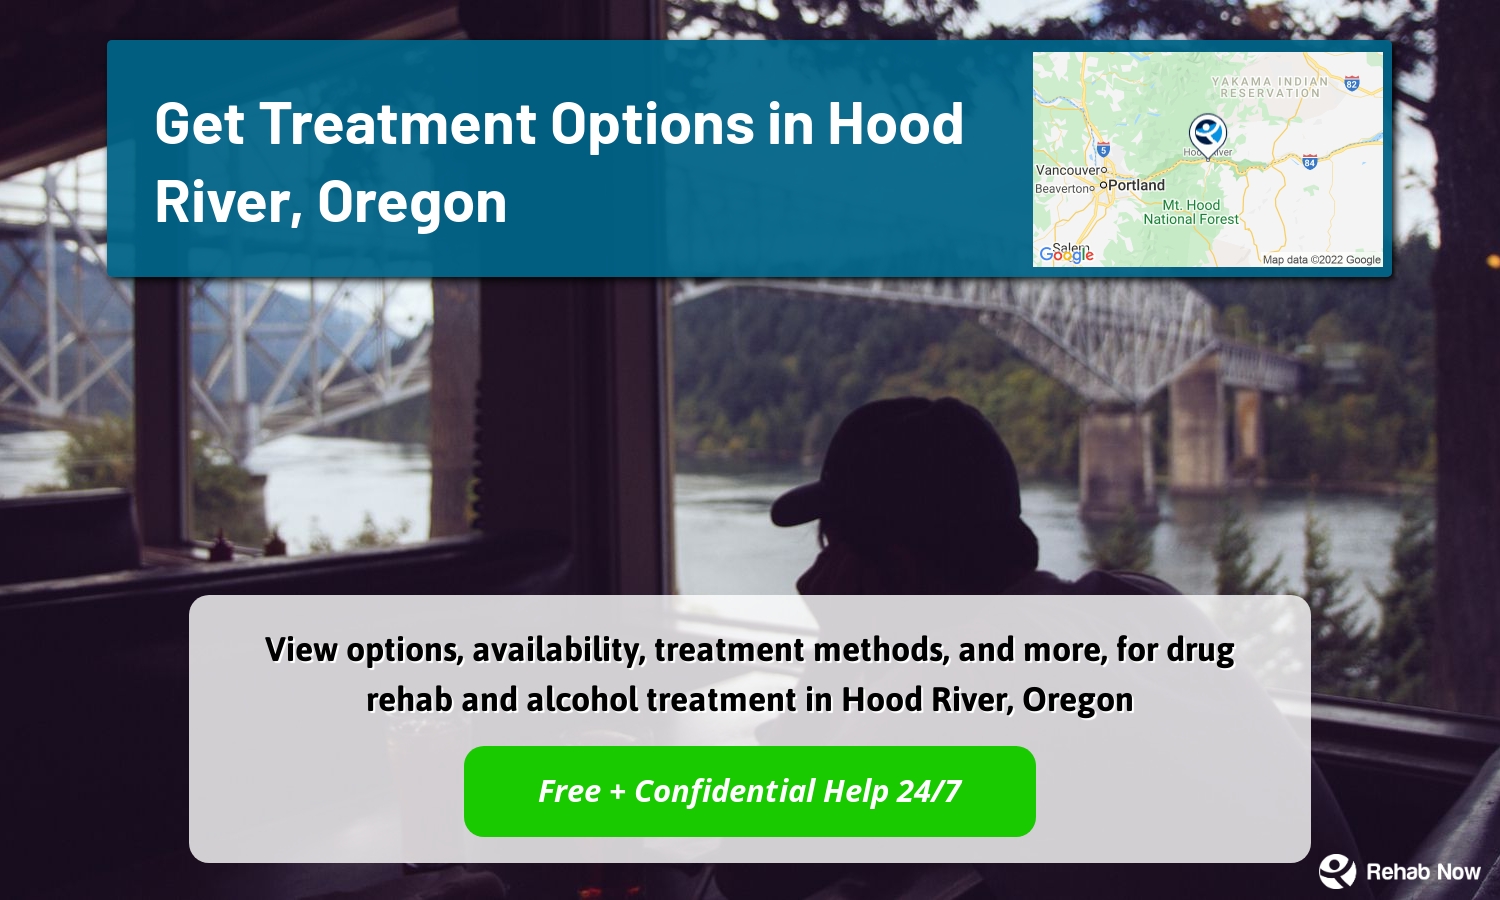 View options, availability, treatment methods, and more, for drug rehab and alcohol treatment in Hood River, Oregon